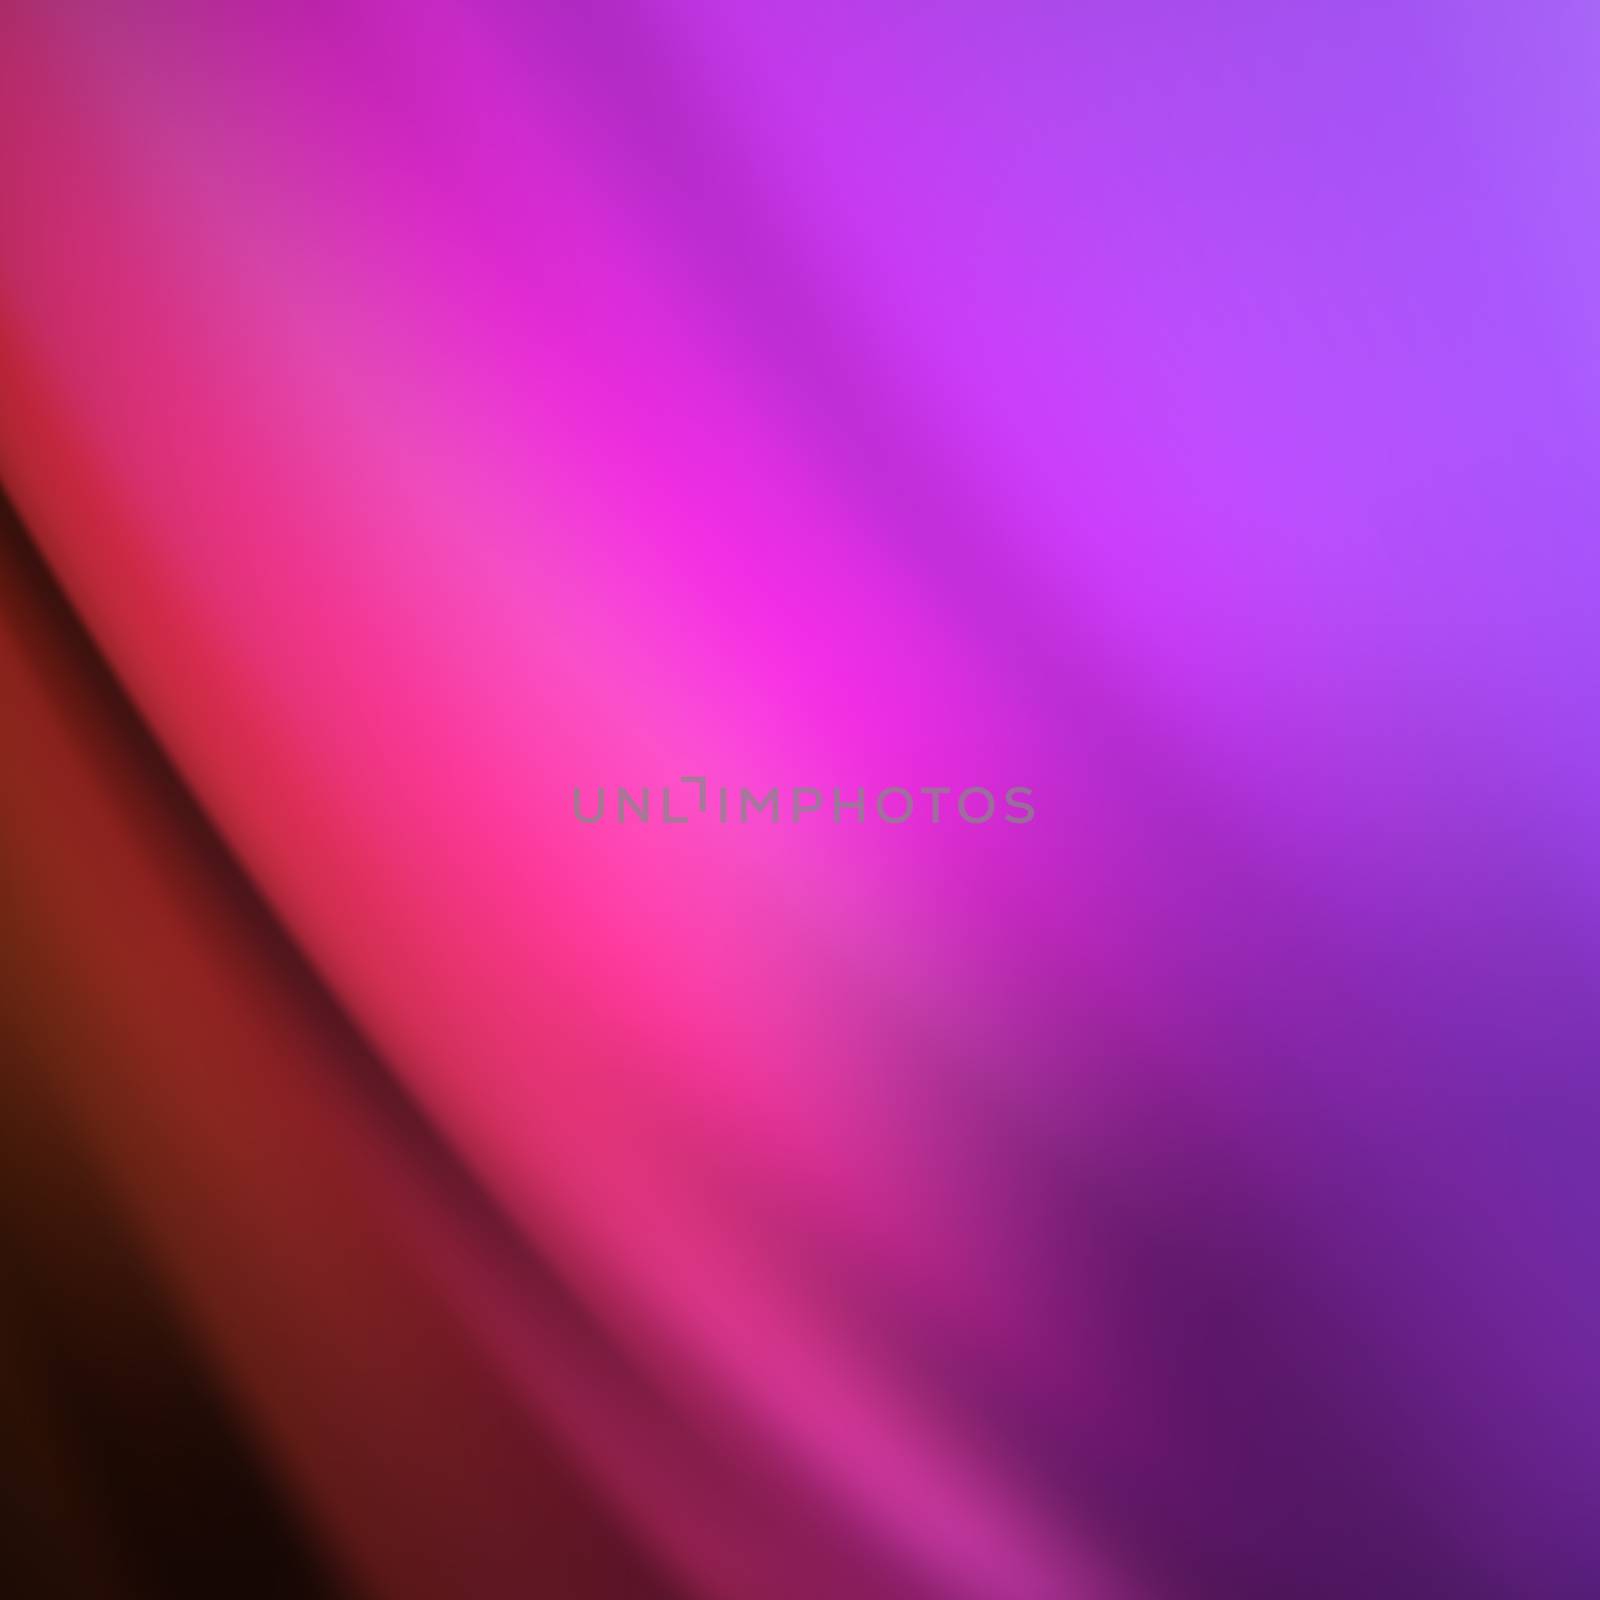 Abstract Texture, Pink Silk by epic33